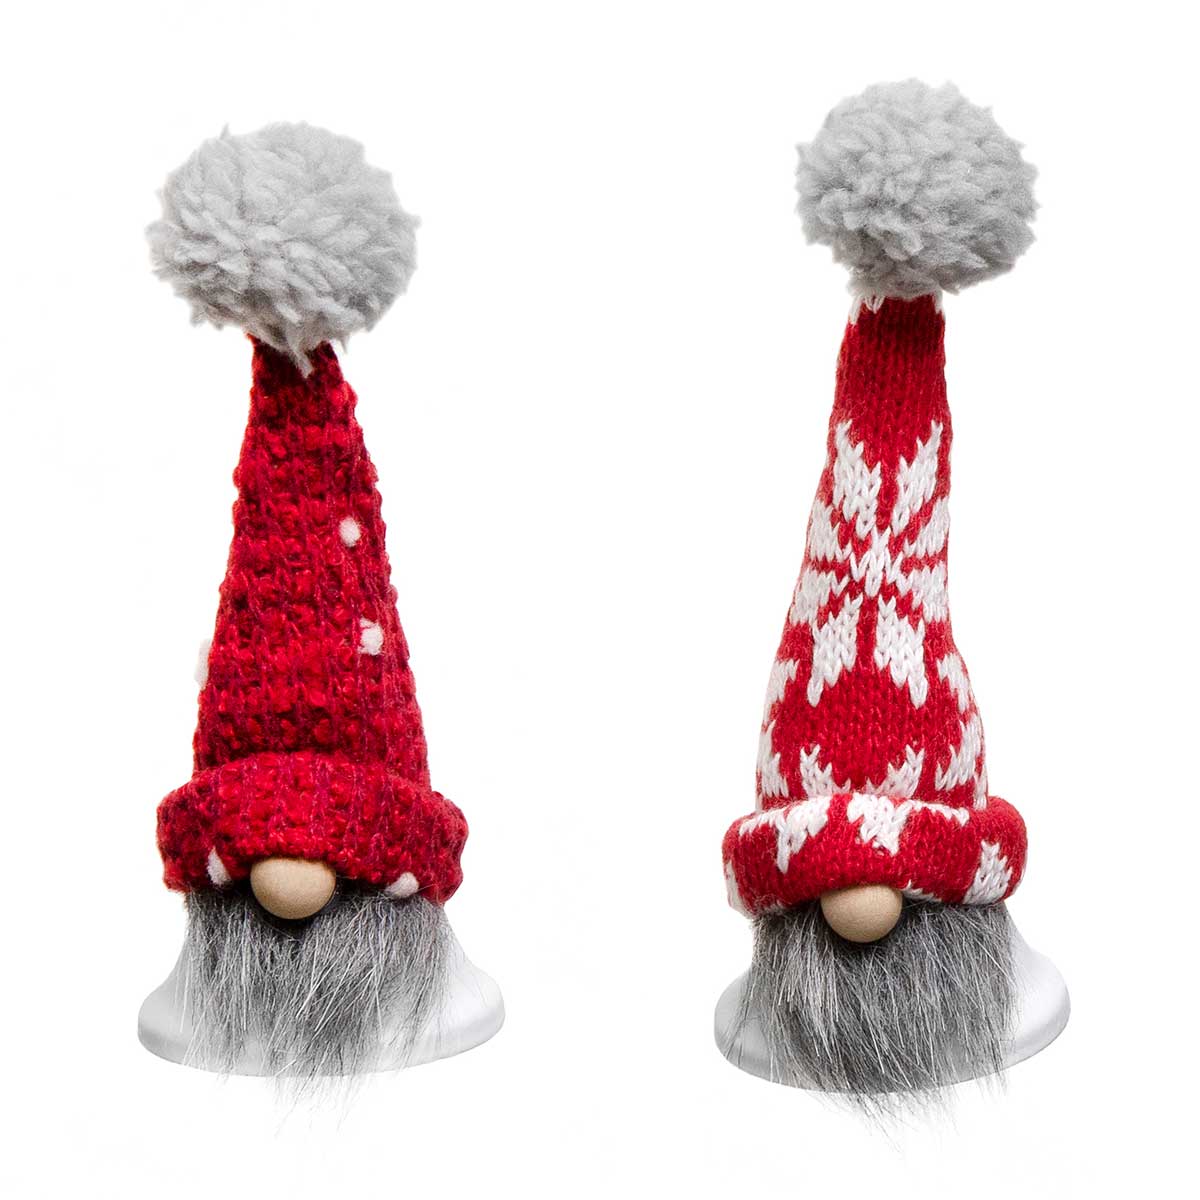 GNOME SWEDISH BELL 2 ASSORTED